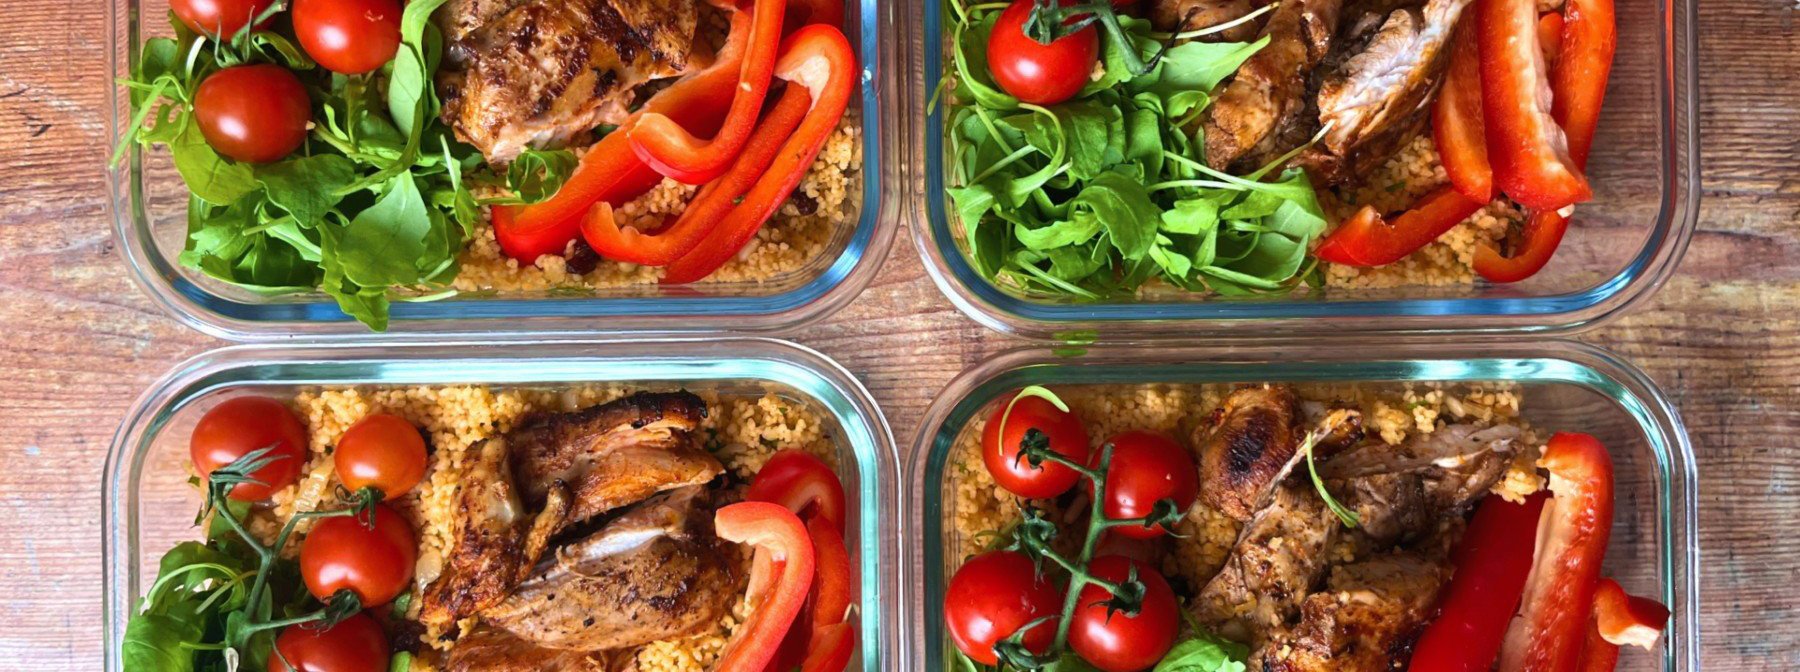 Harissa Chicken and Moroccan Couscous Meal Prep